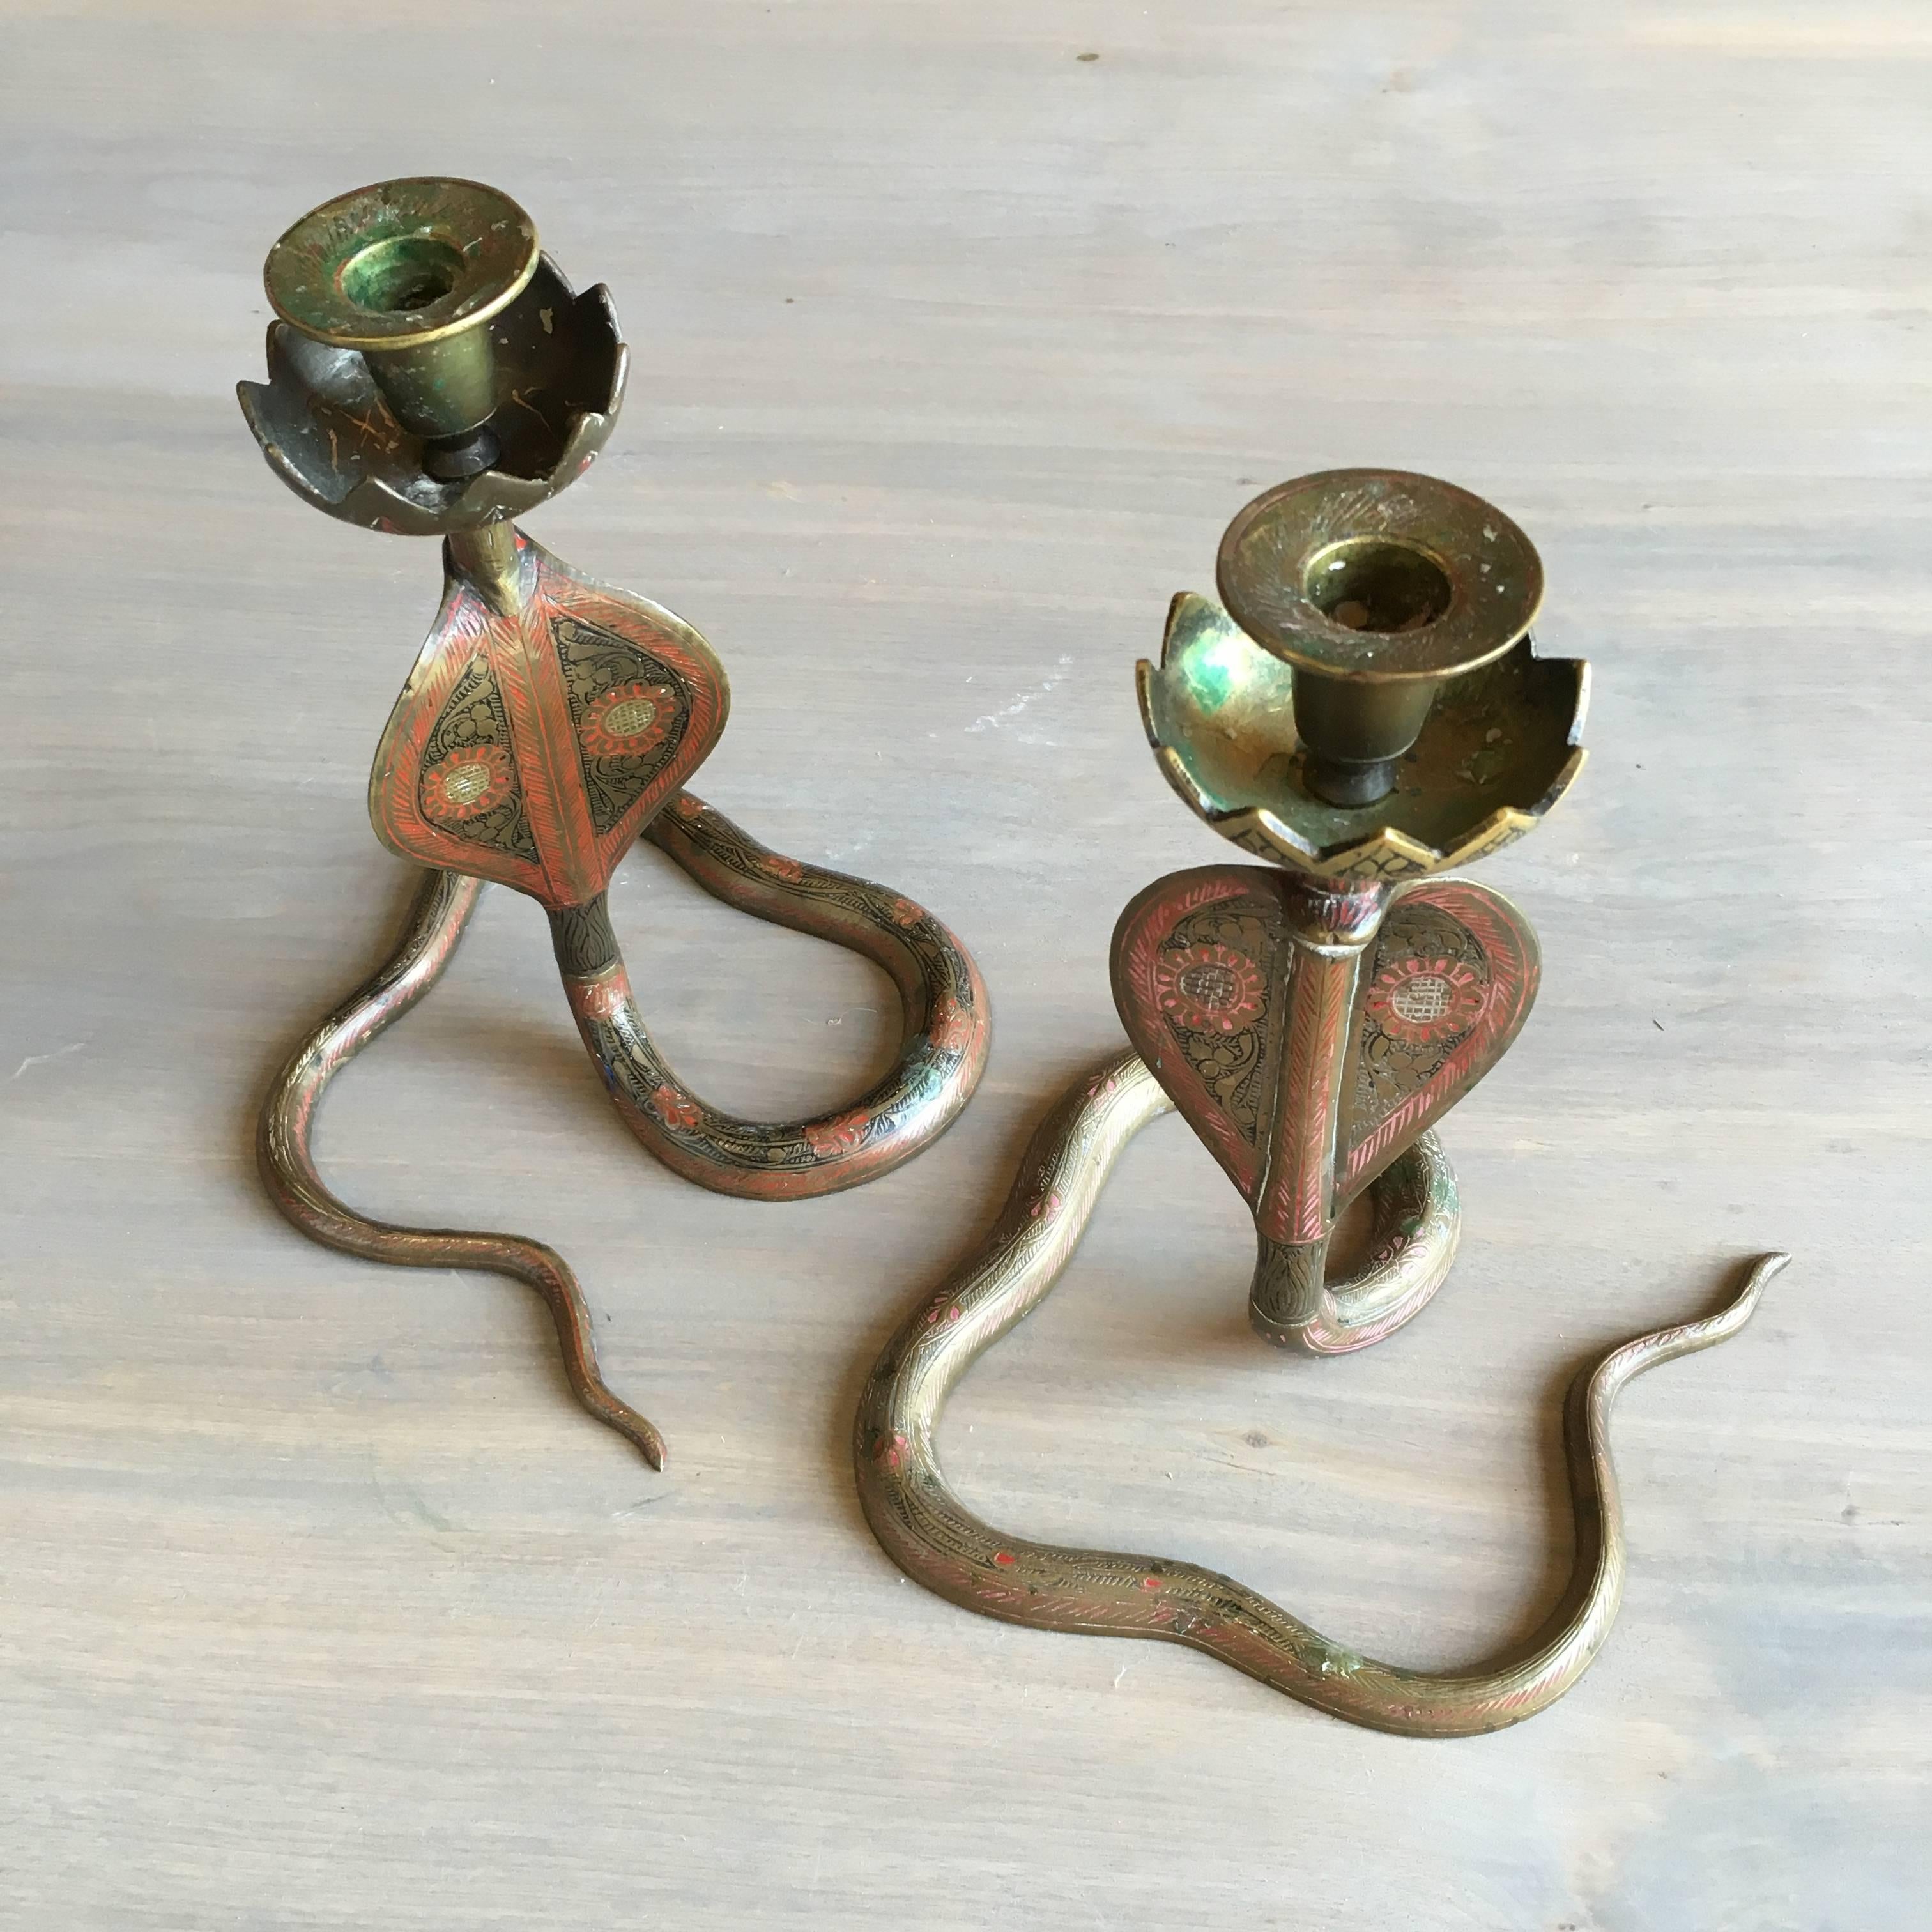 Pair of cobra form candlesticks in brass with enamel decoration, Moroccan, circa 1940.